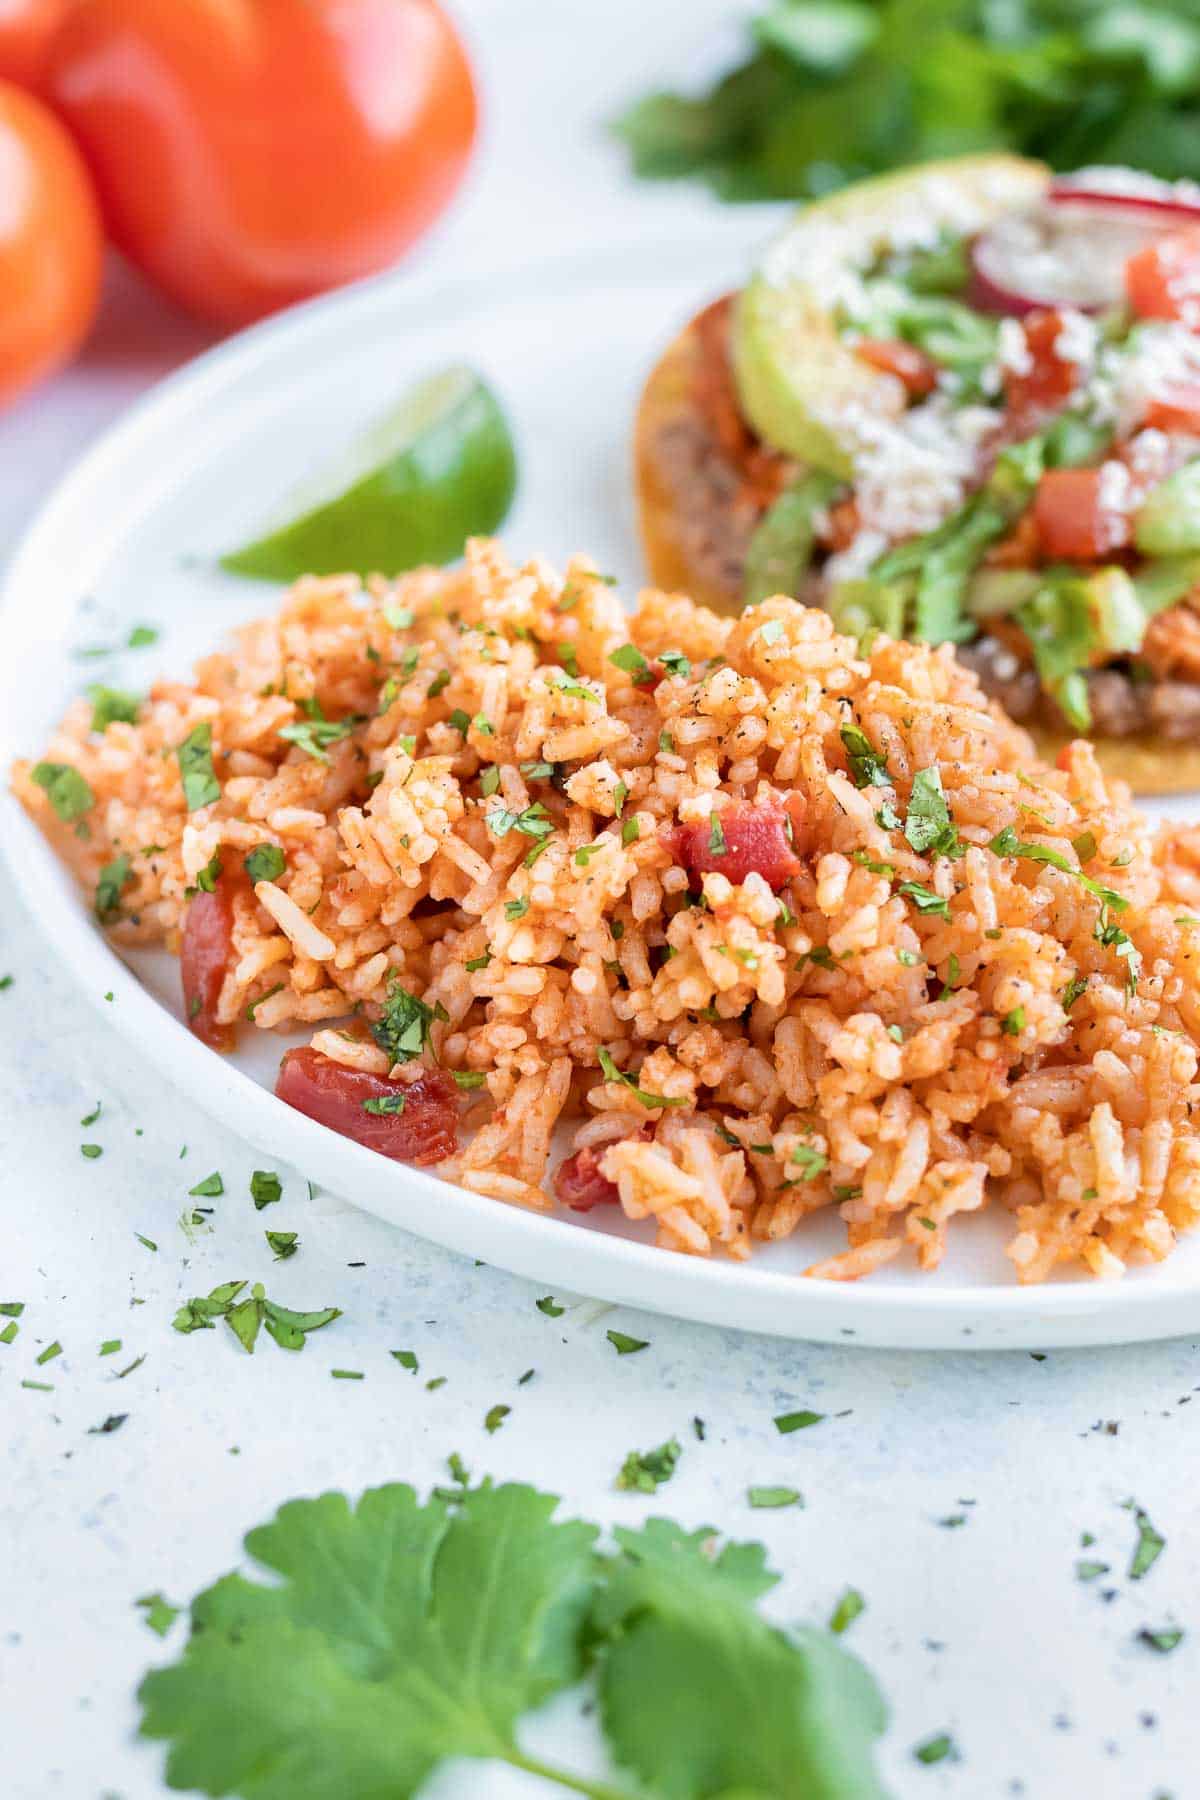 Easy Mexican rice is served as a side dish on a plate.